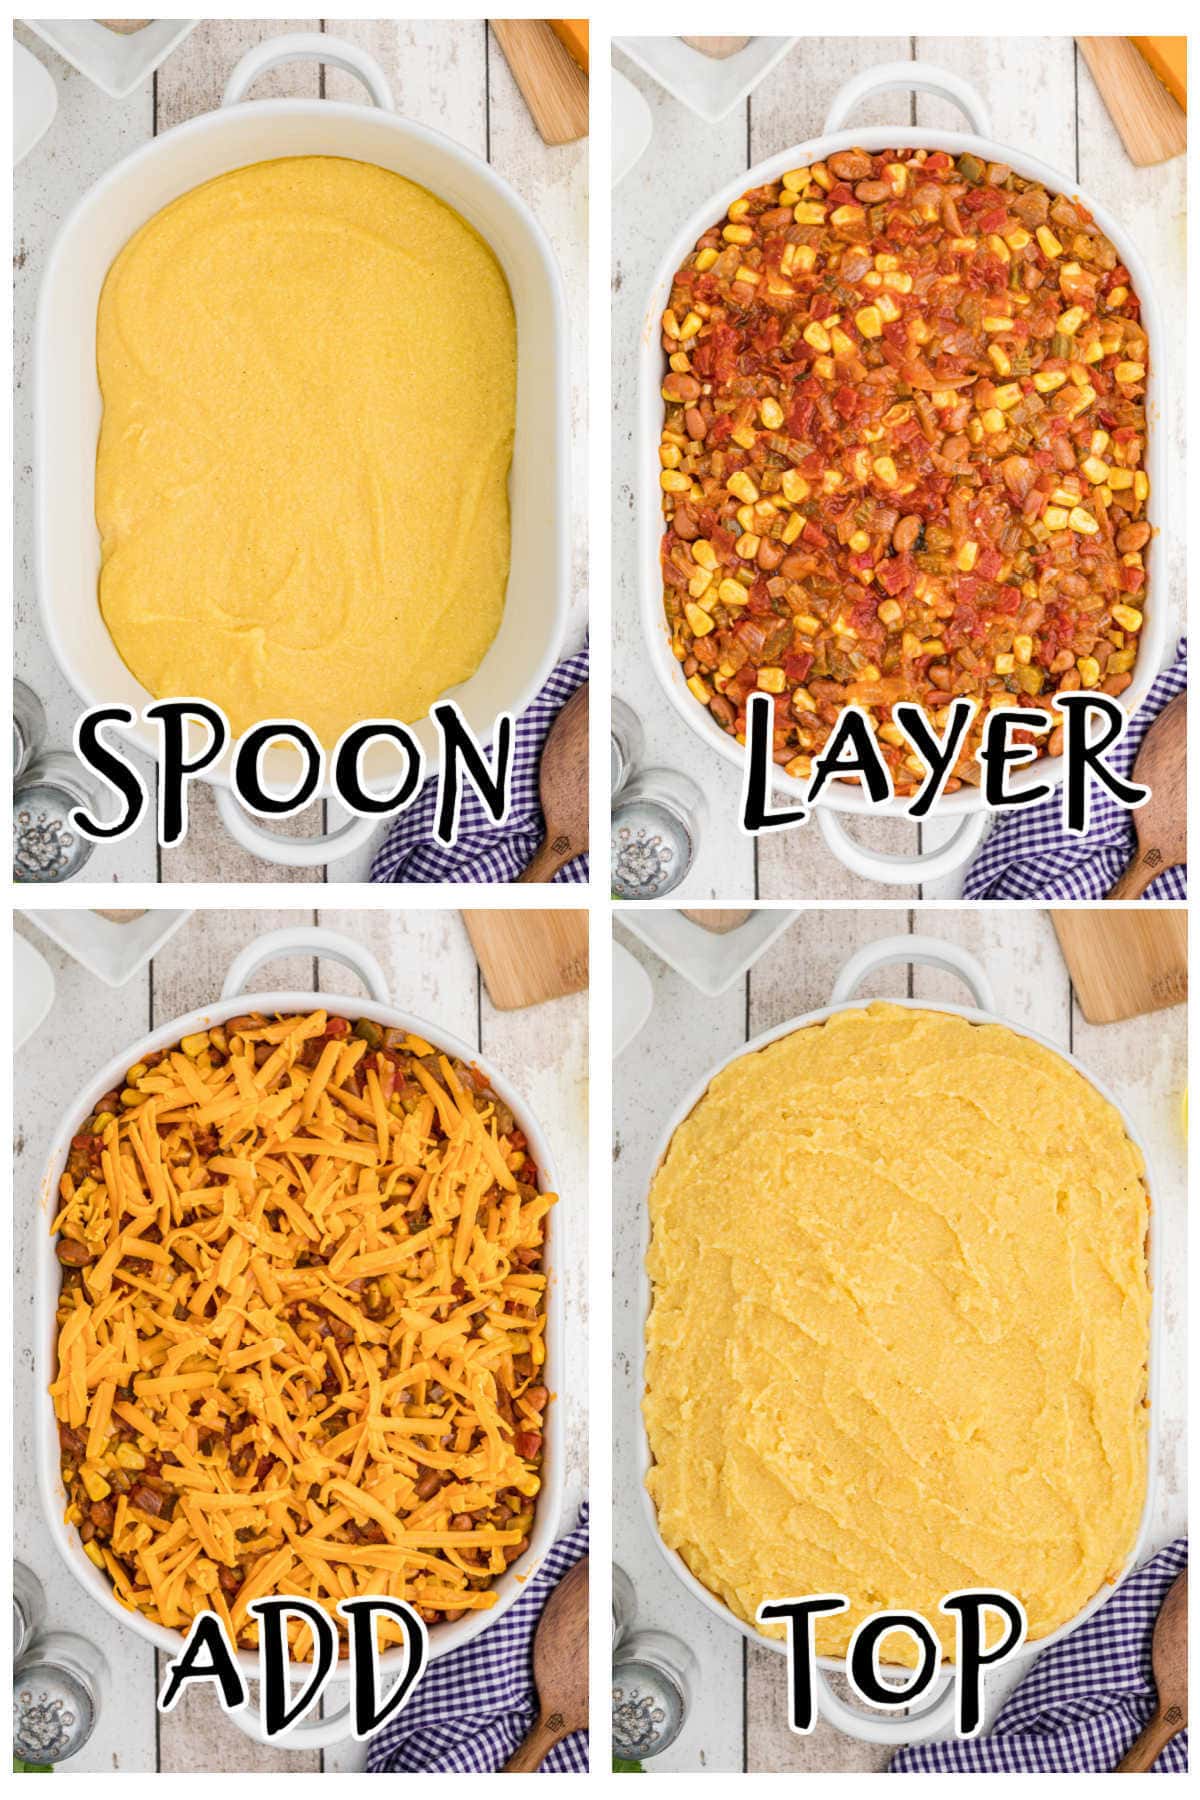 Steps for layering the casserole.